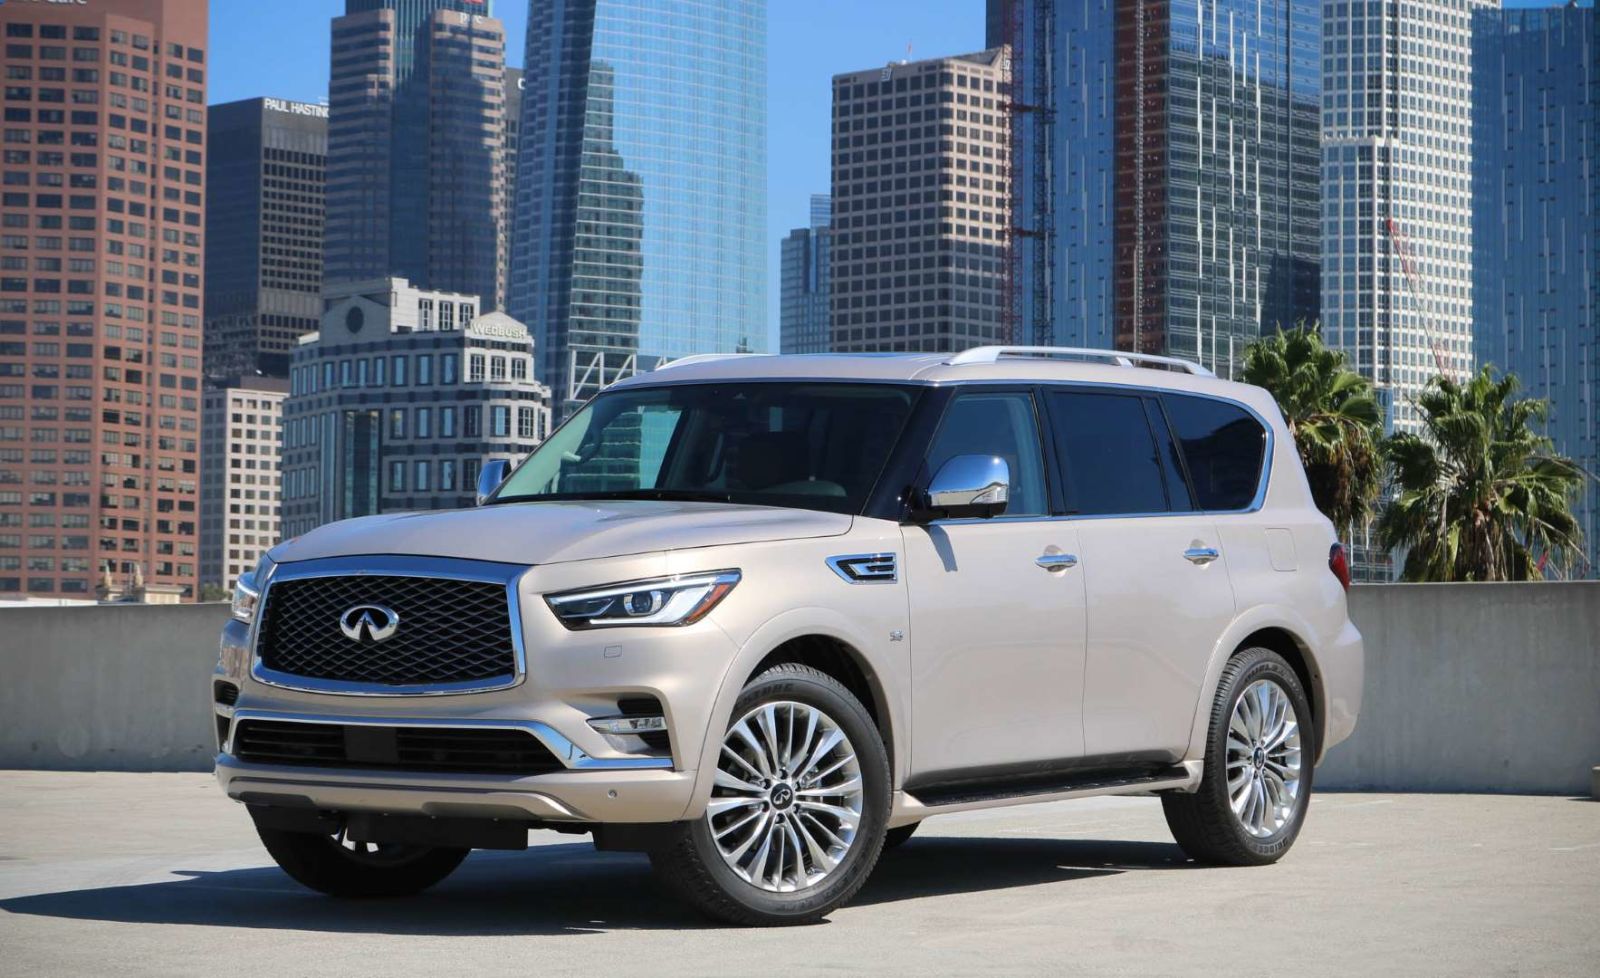 Illustration for article titled The Infiniti QX80 looks less like a beluga whale now